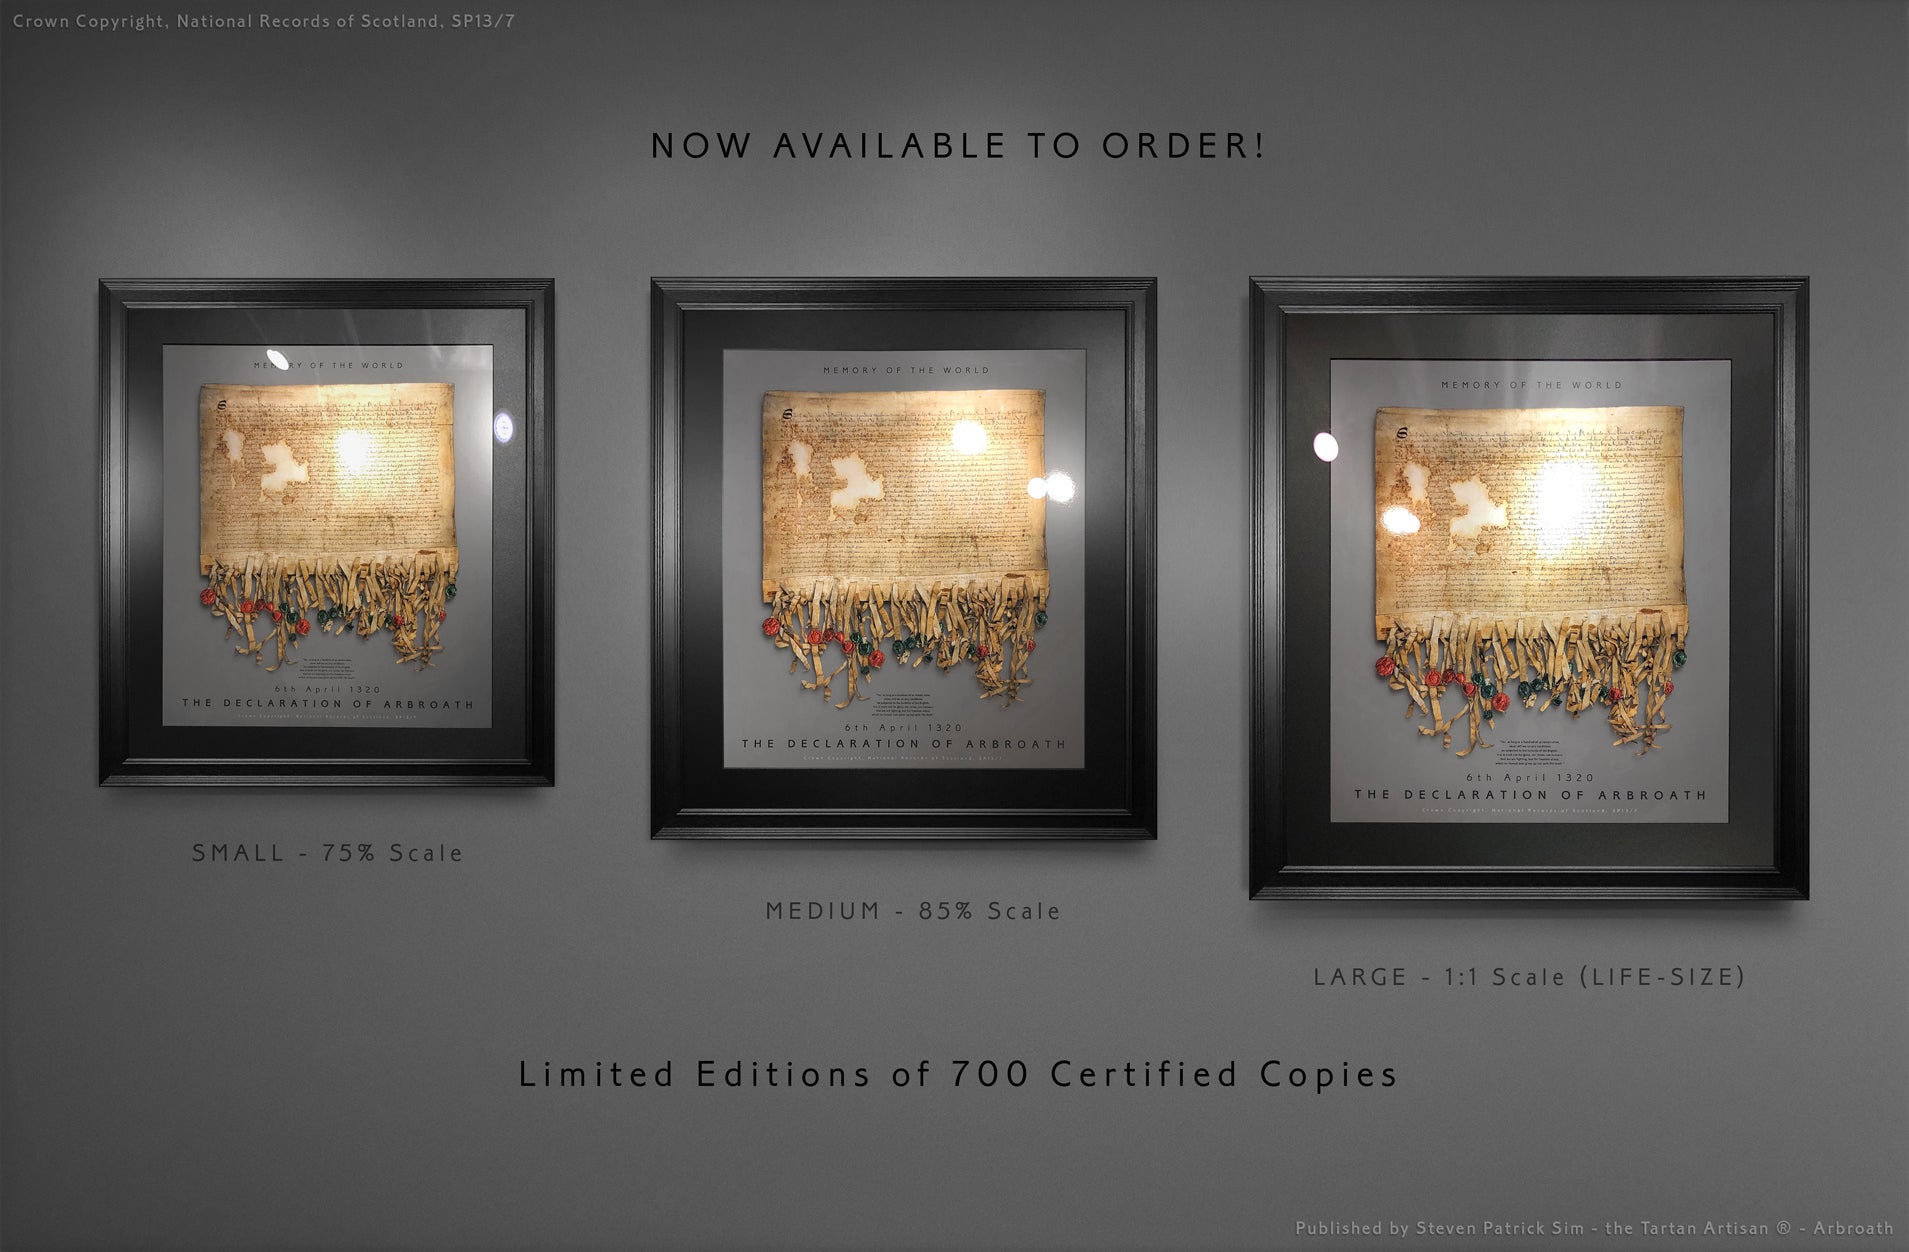 The Declaration of Arbroath Gold Metallic Print Editions - Pewter - LED Laser reflective gold effect